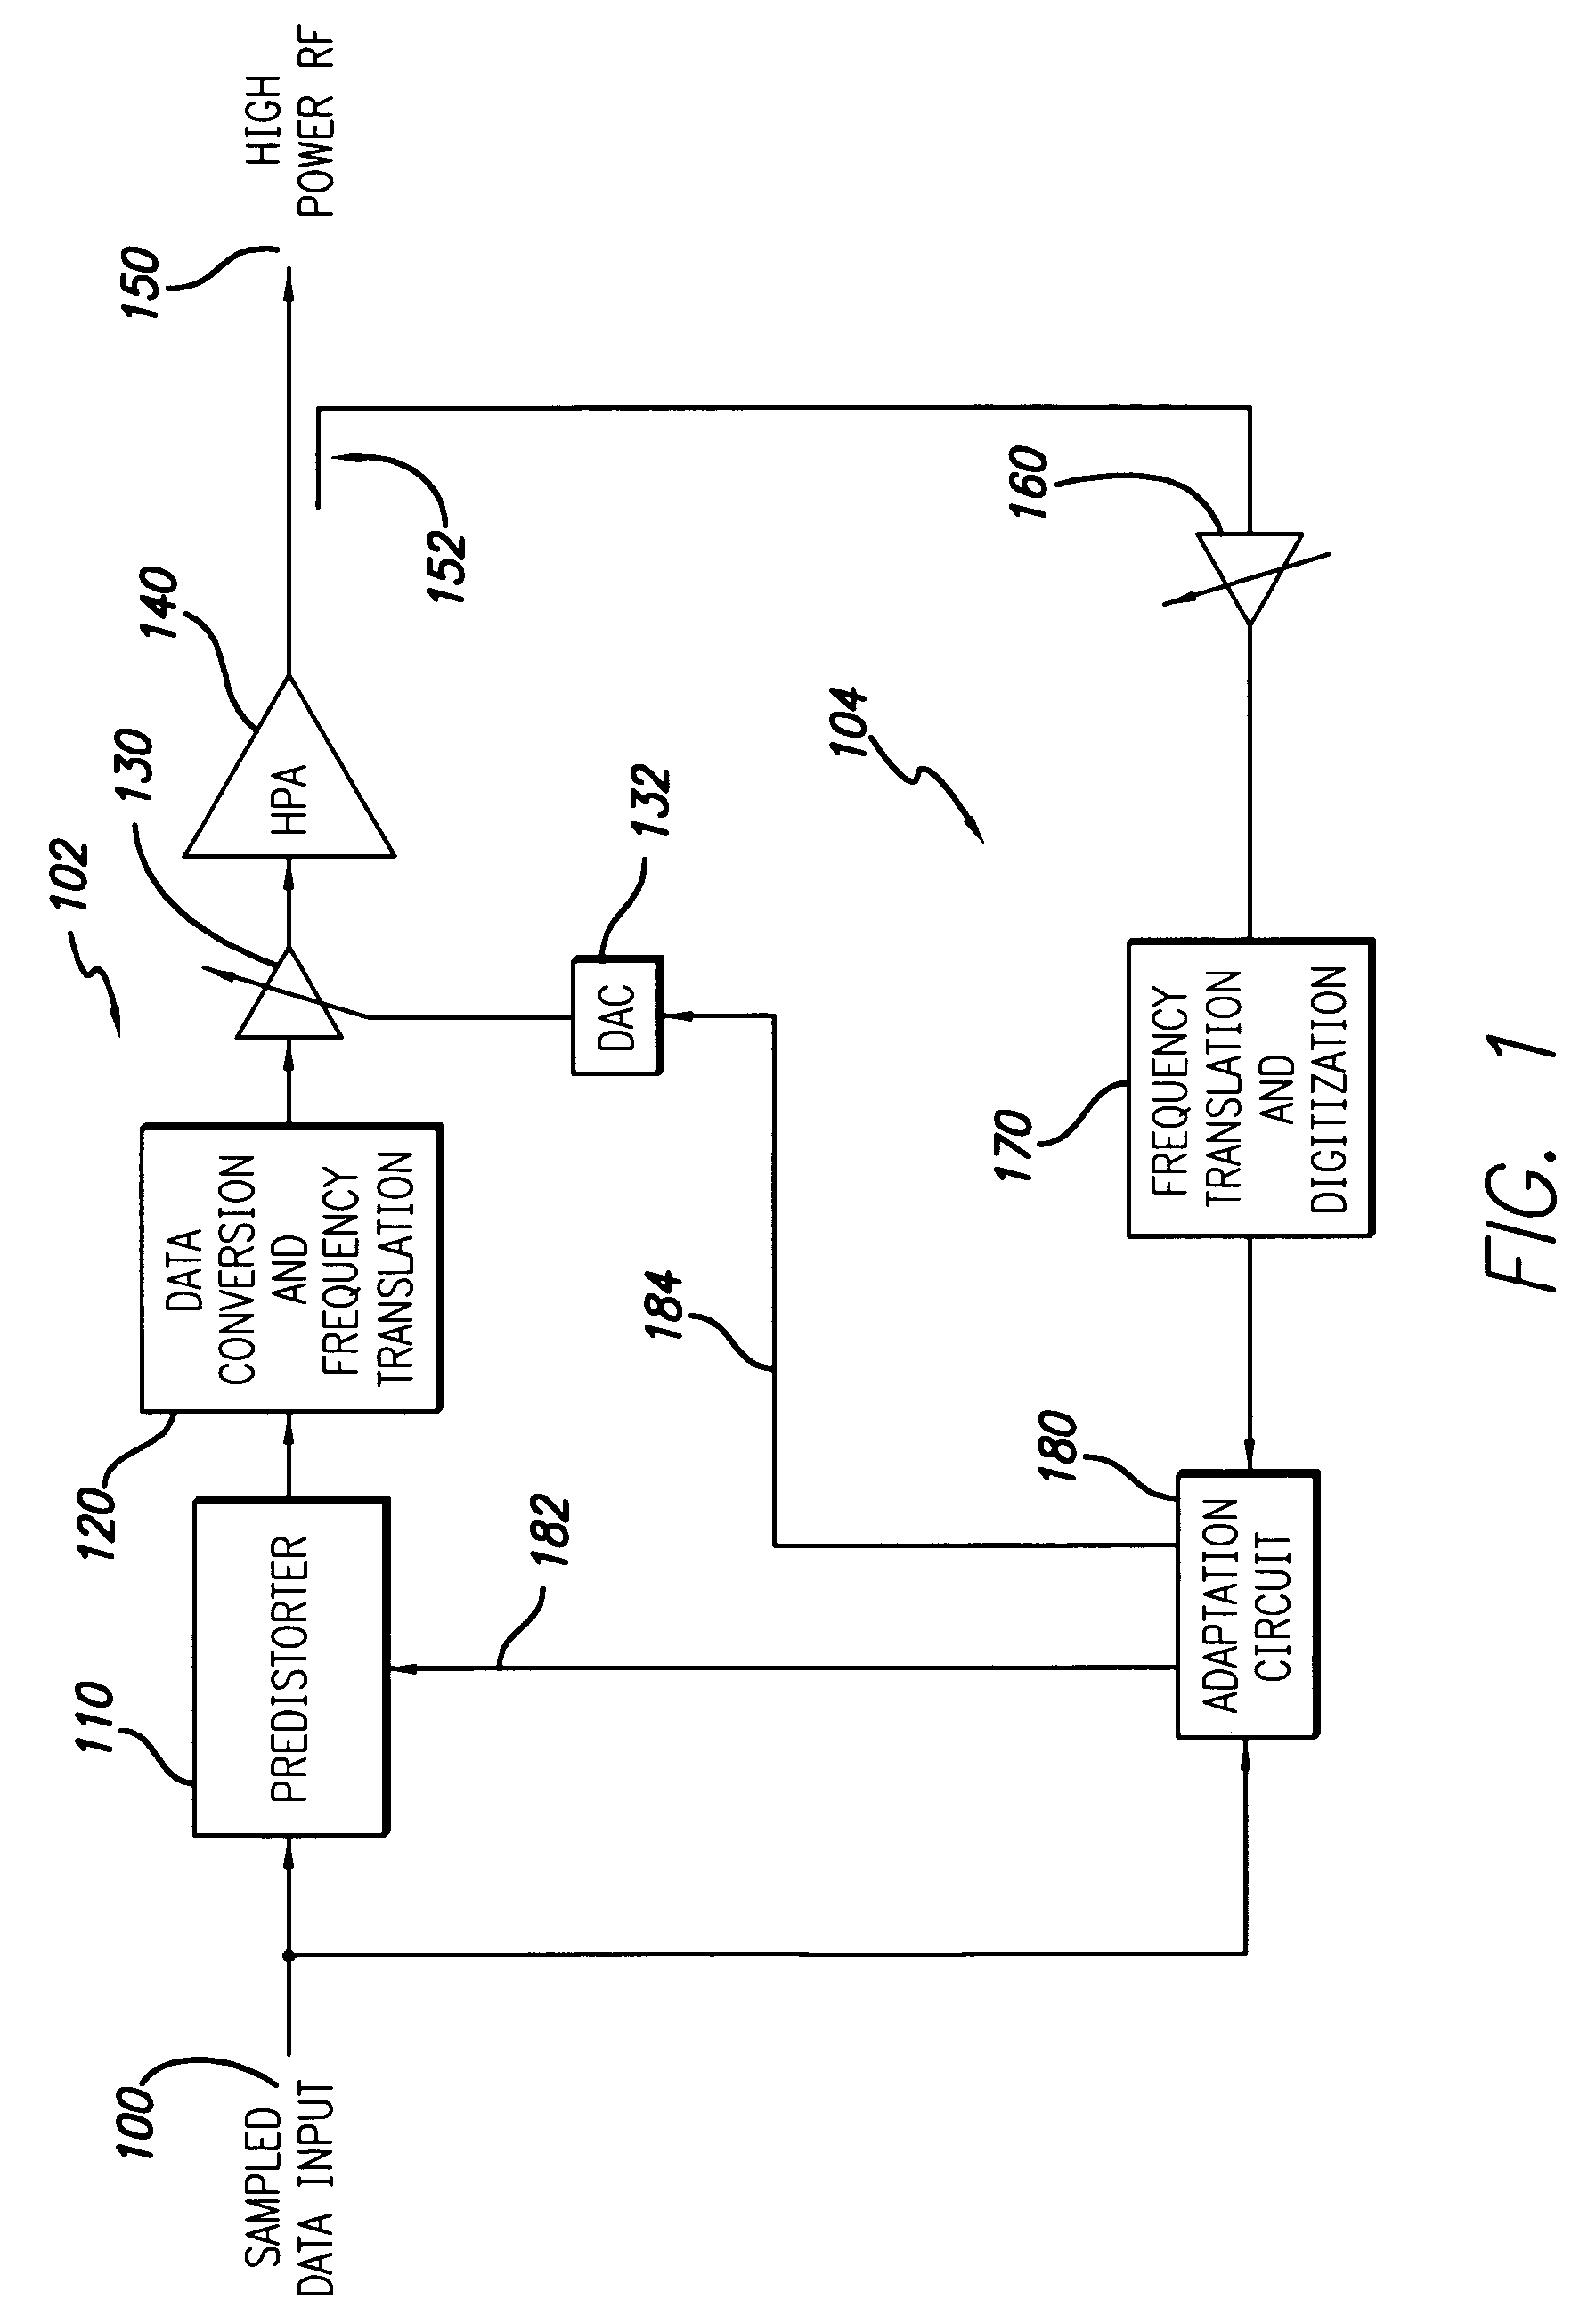 System and method for forward path gain control in a digital predistortion linearized transmitter